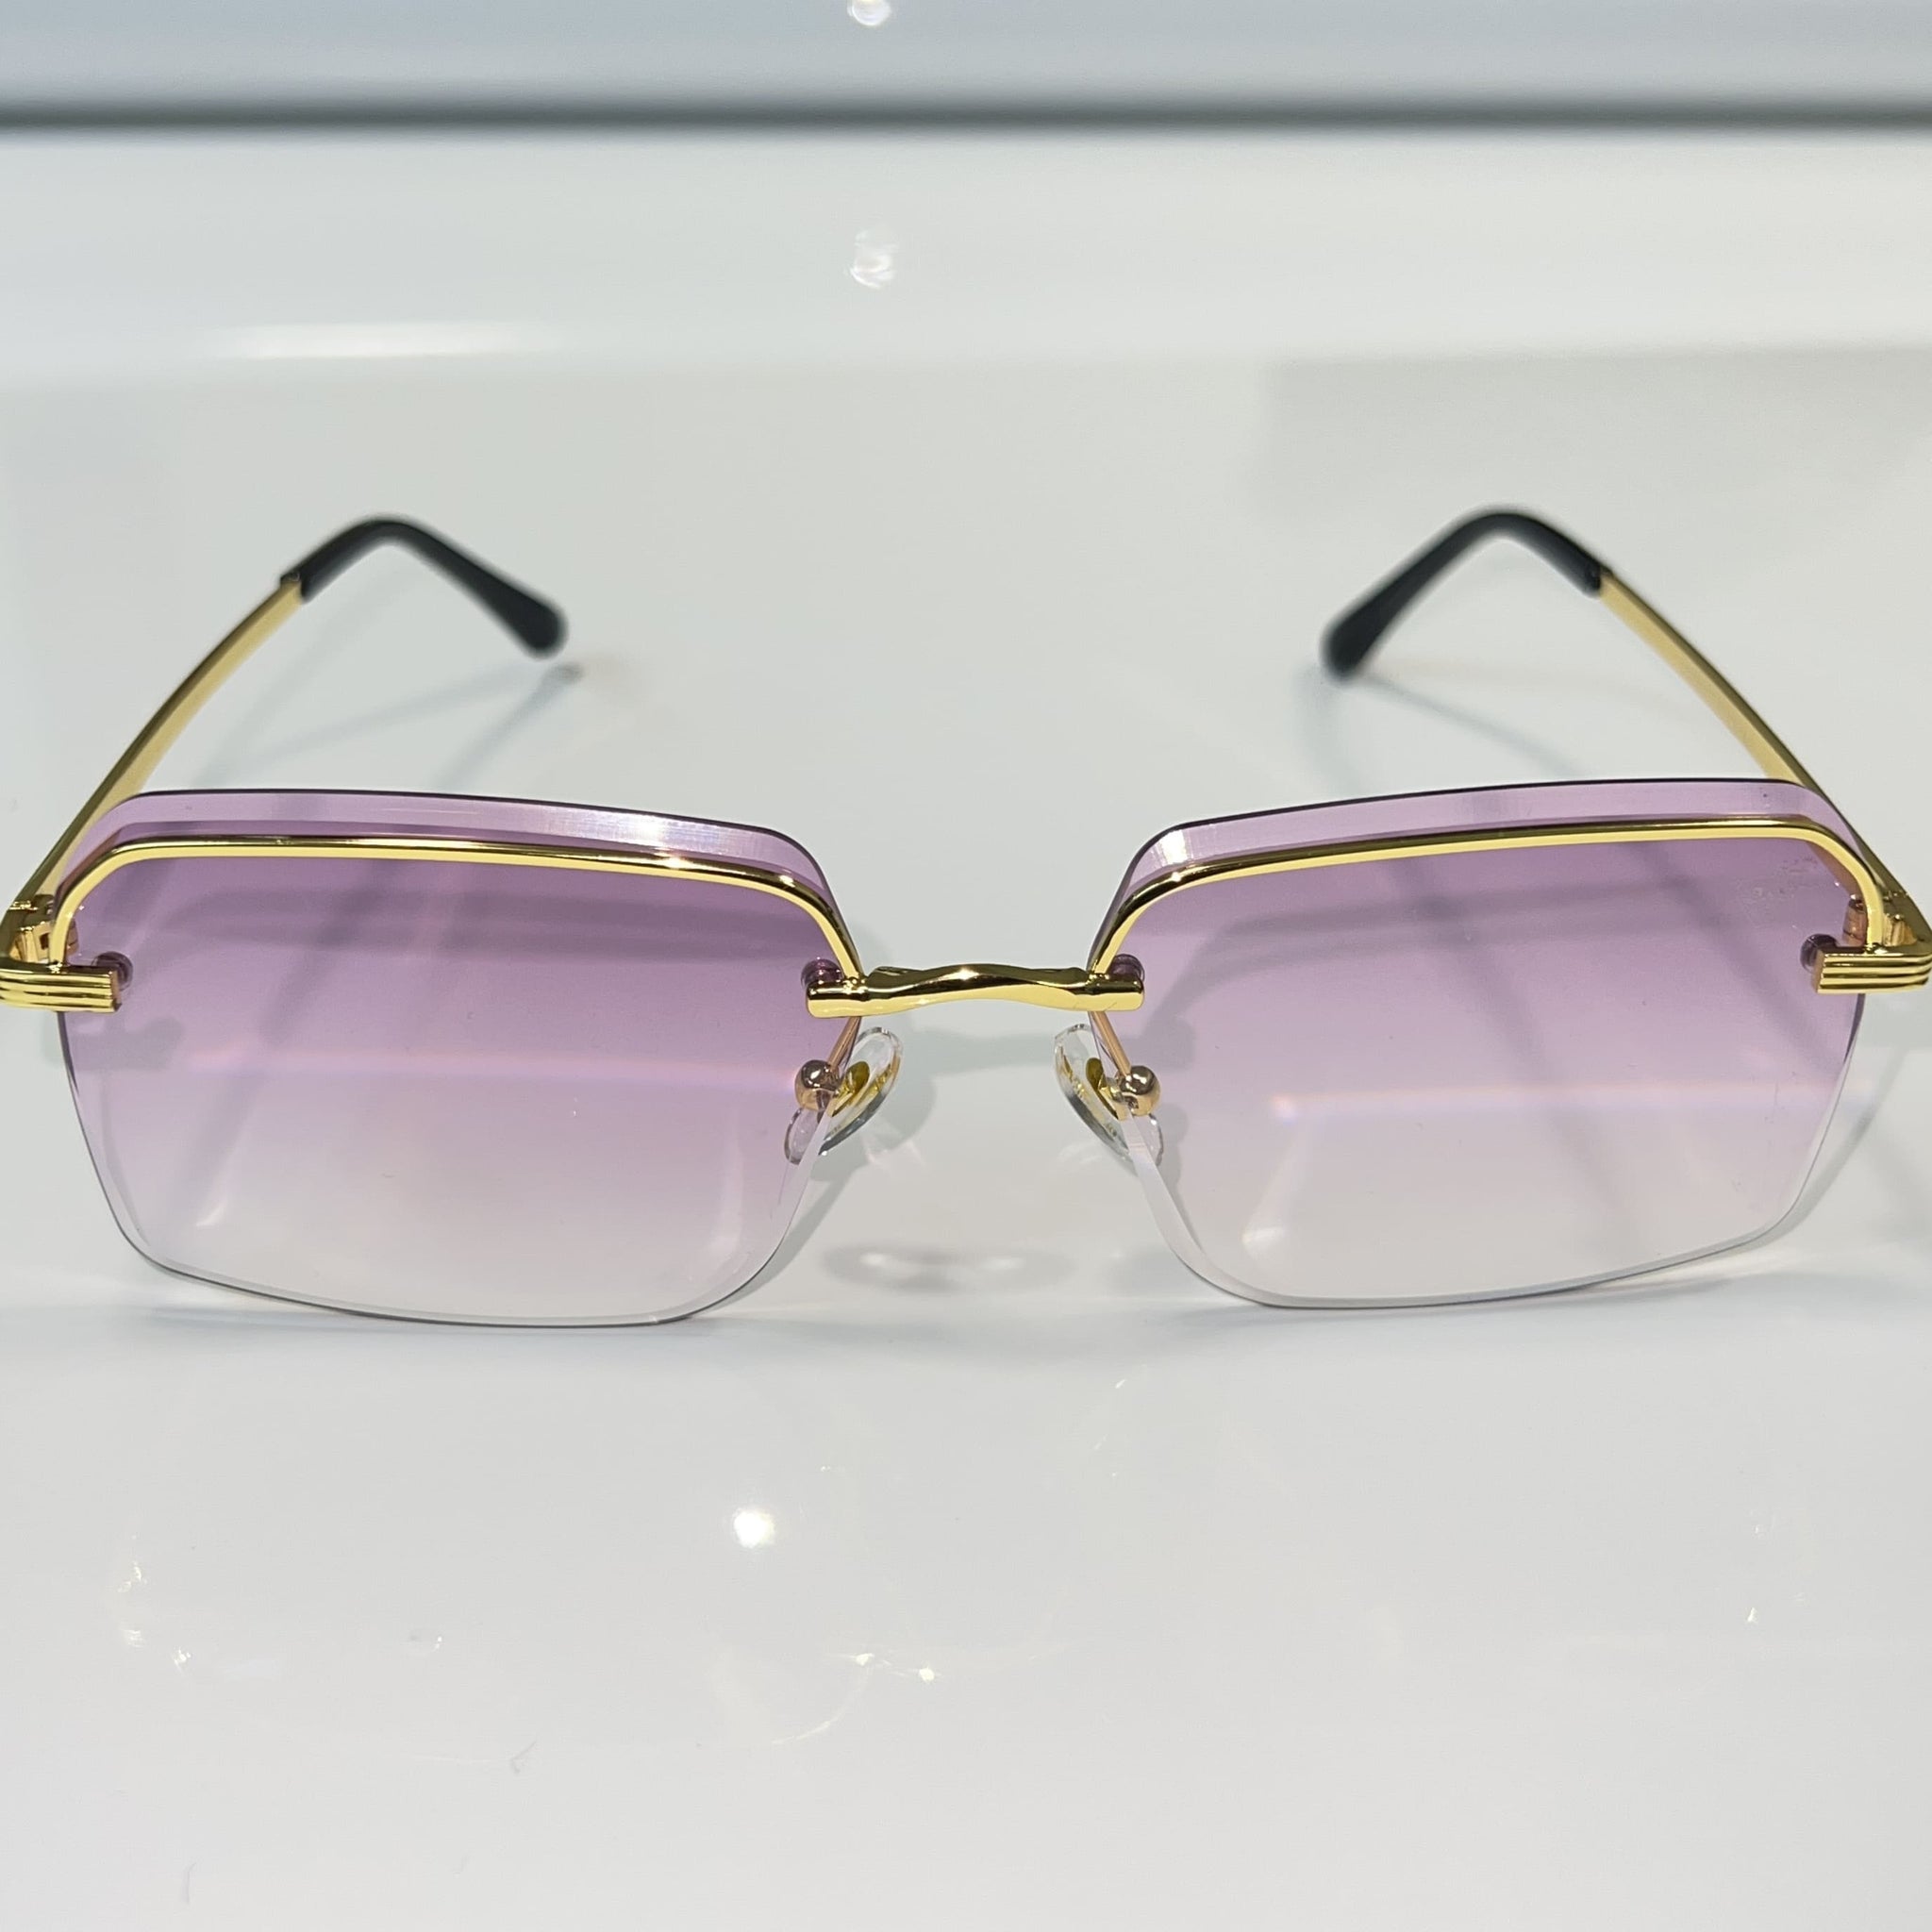 Invincible Glasses - 14k gold plated - Pink Shade - Sehgal Glasses